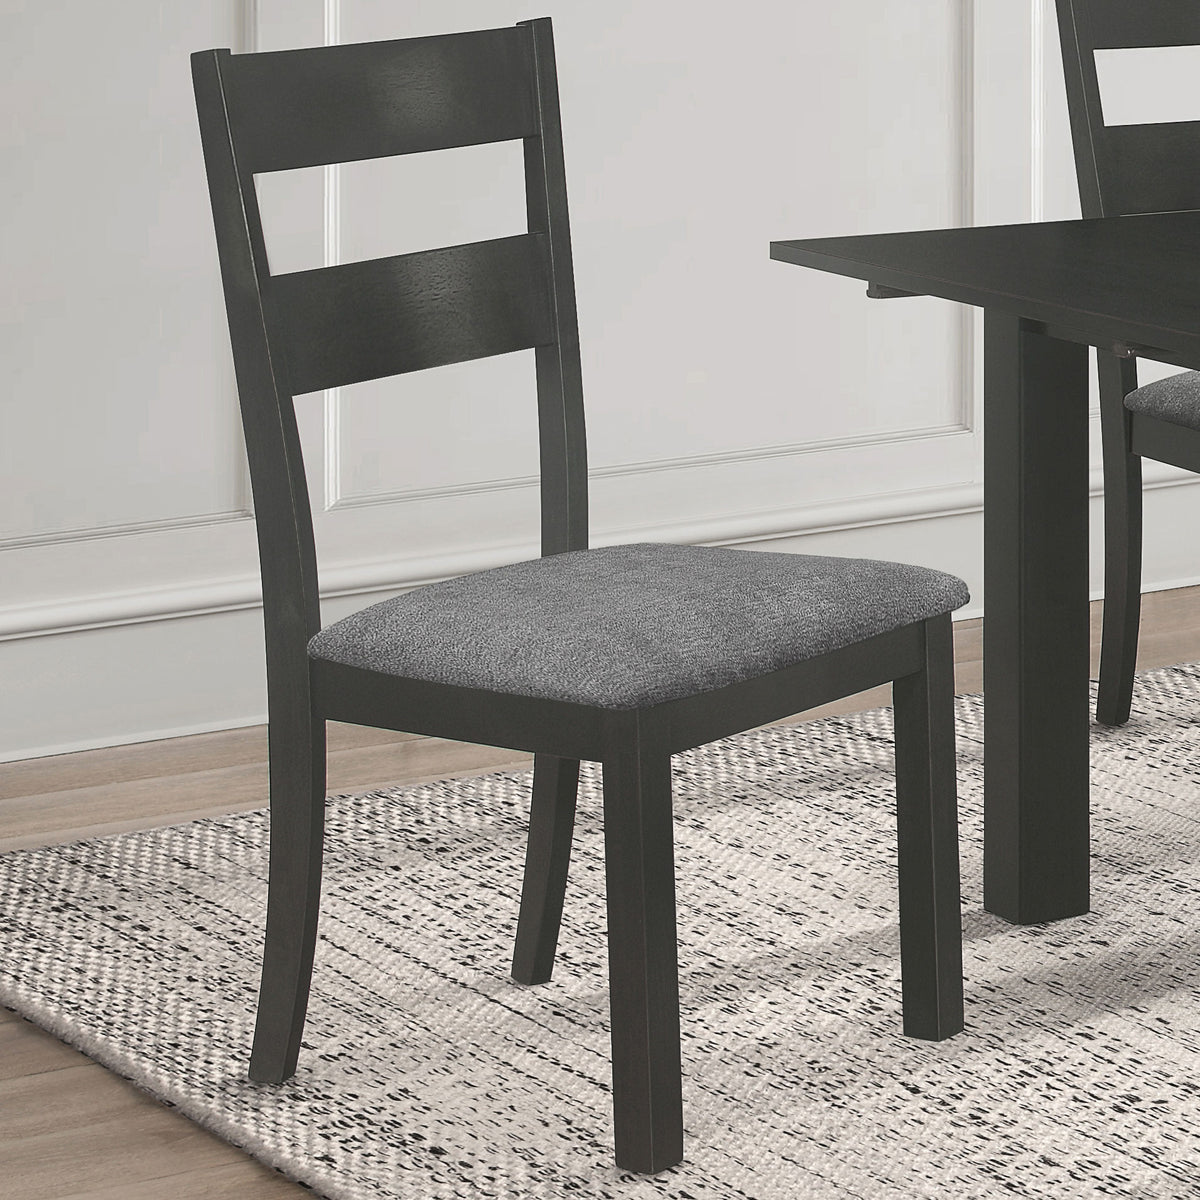 Jakob Upholstered Side Chairs with Ladder Back (Set of 2) Grey and Black Jakob Upholstered Side Chairs with Ladder Back (Set of 2) Grey and Black Half Price Furniture